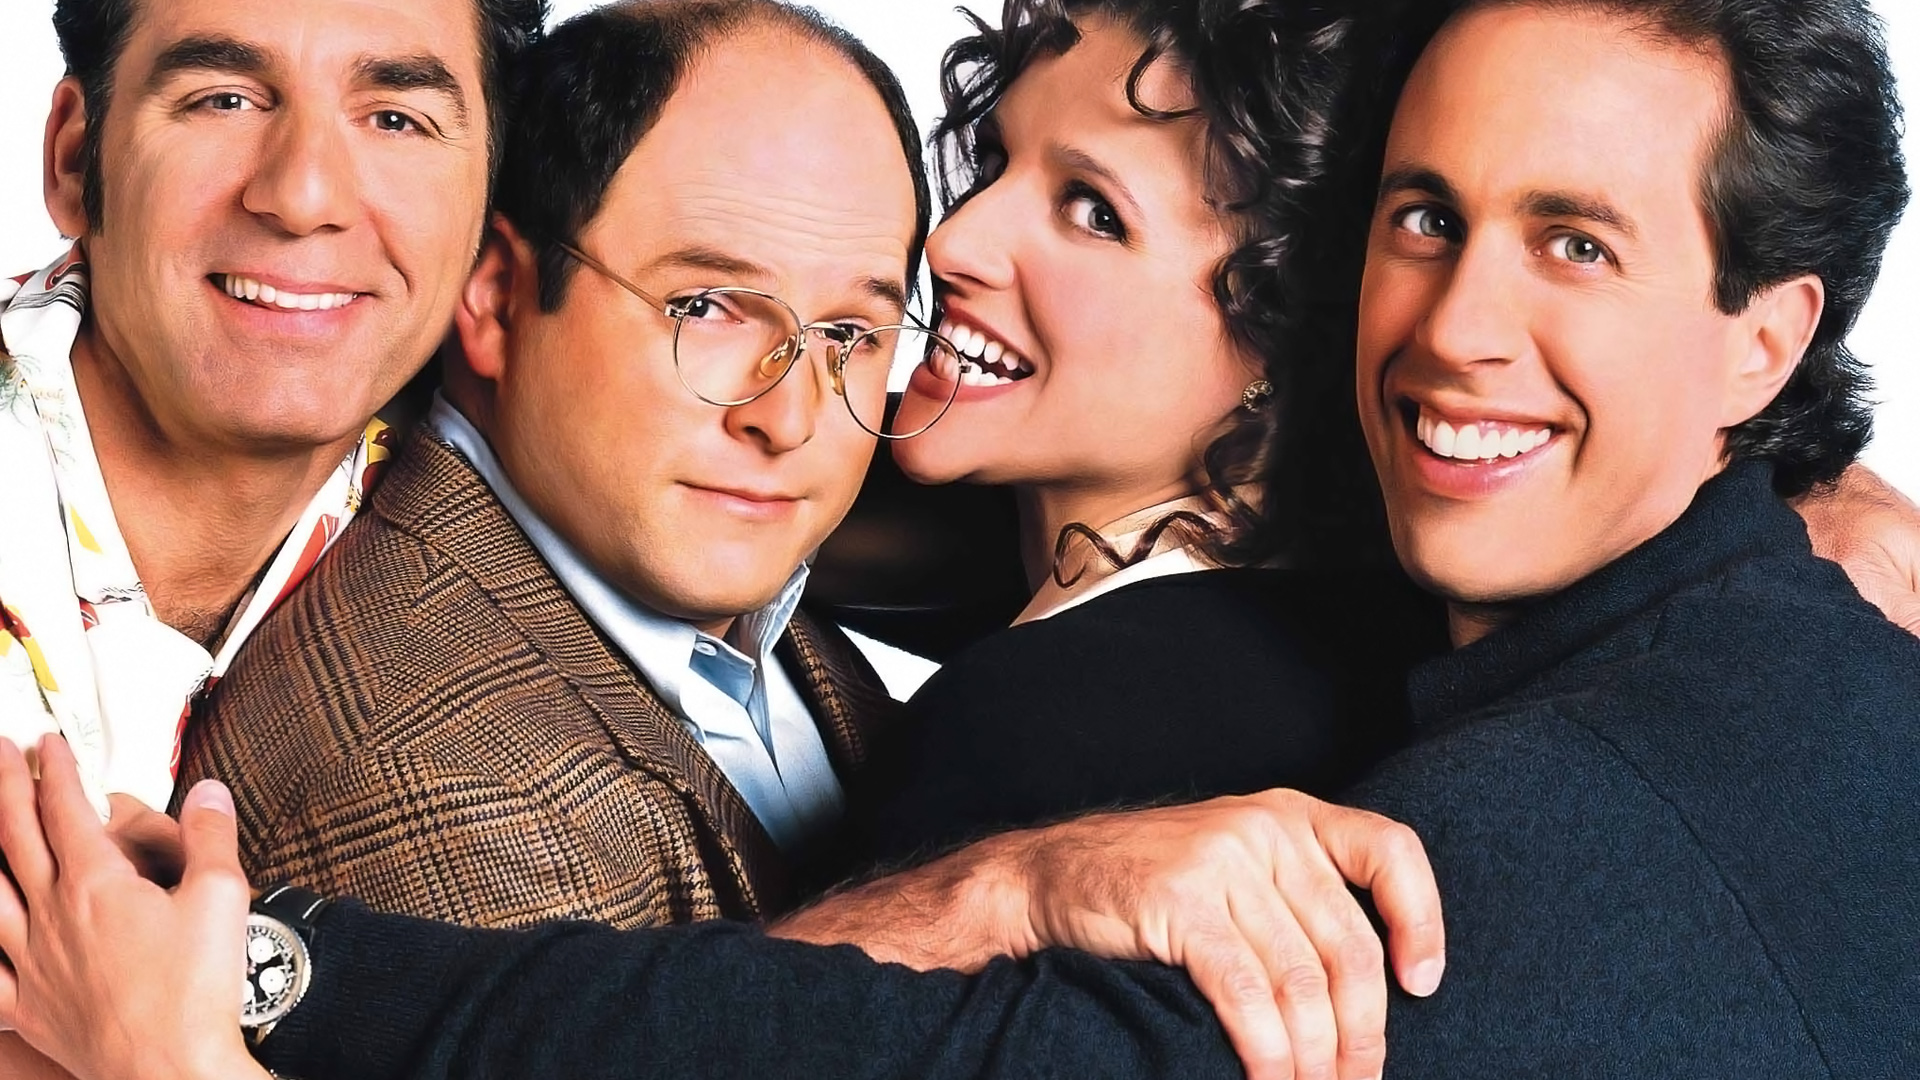 Googled seinfeld wallpaper was not disappointed  rseinfeld